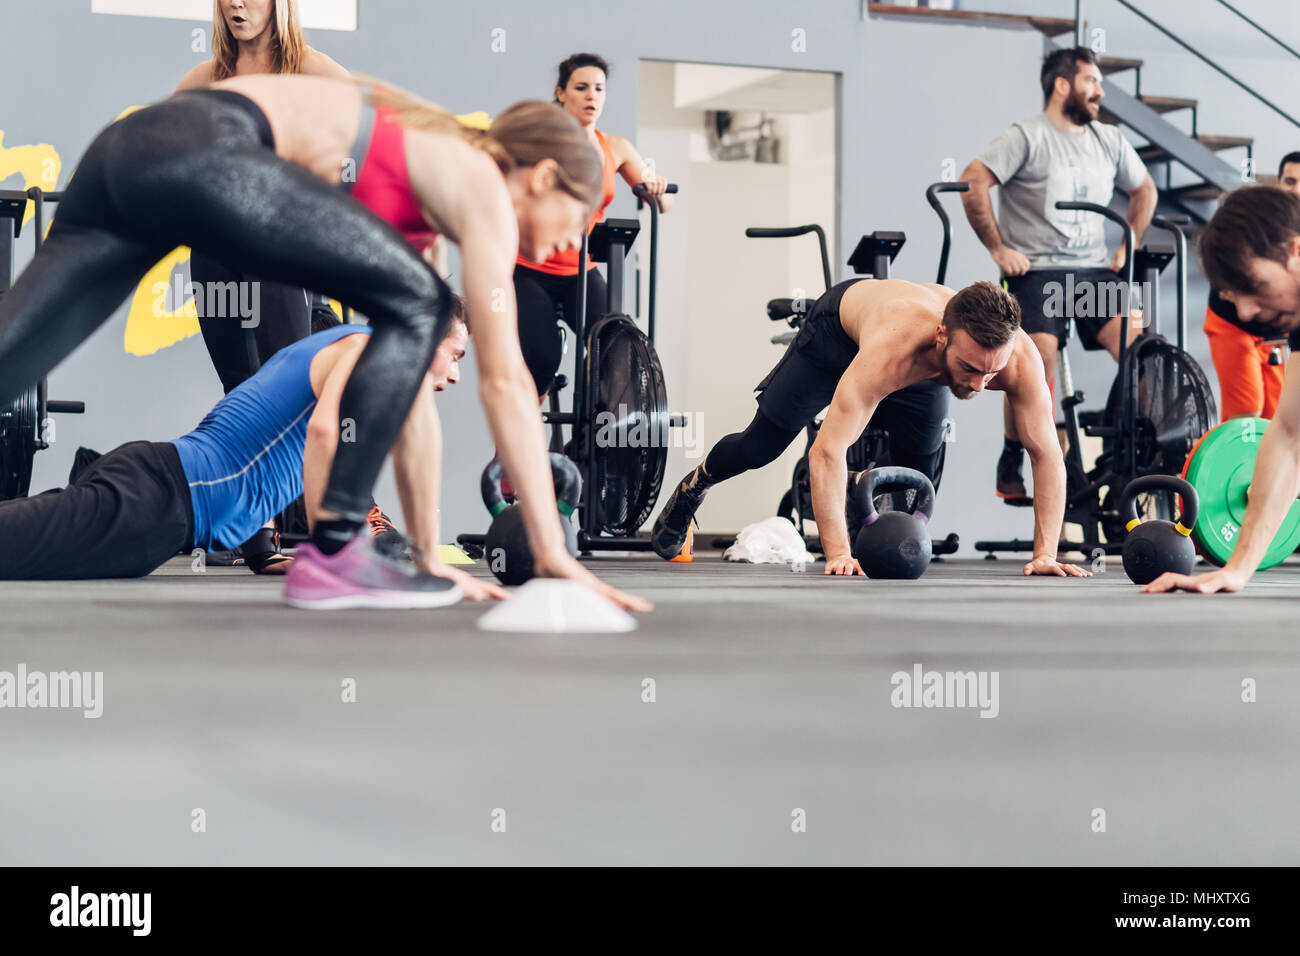 Medium group of people training in gym Stock Photo